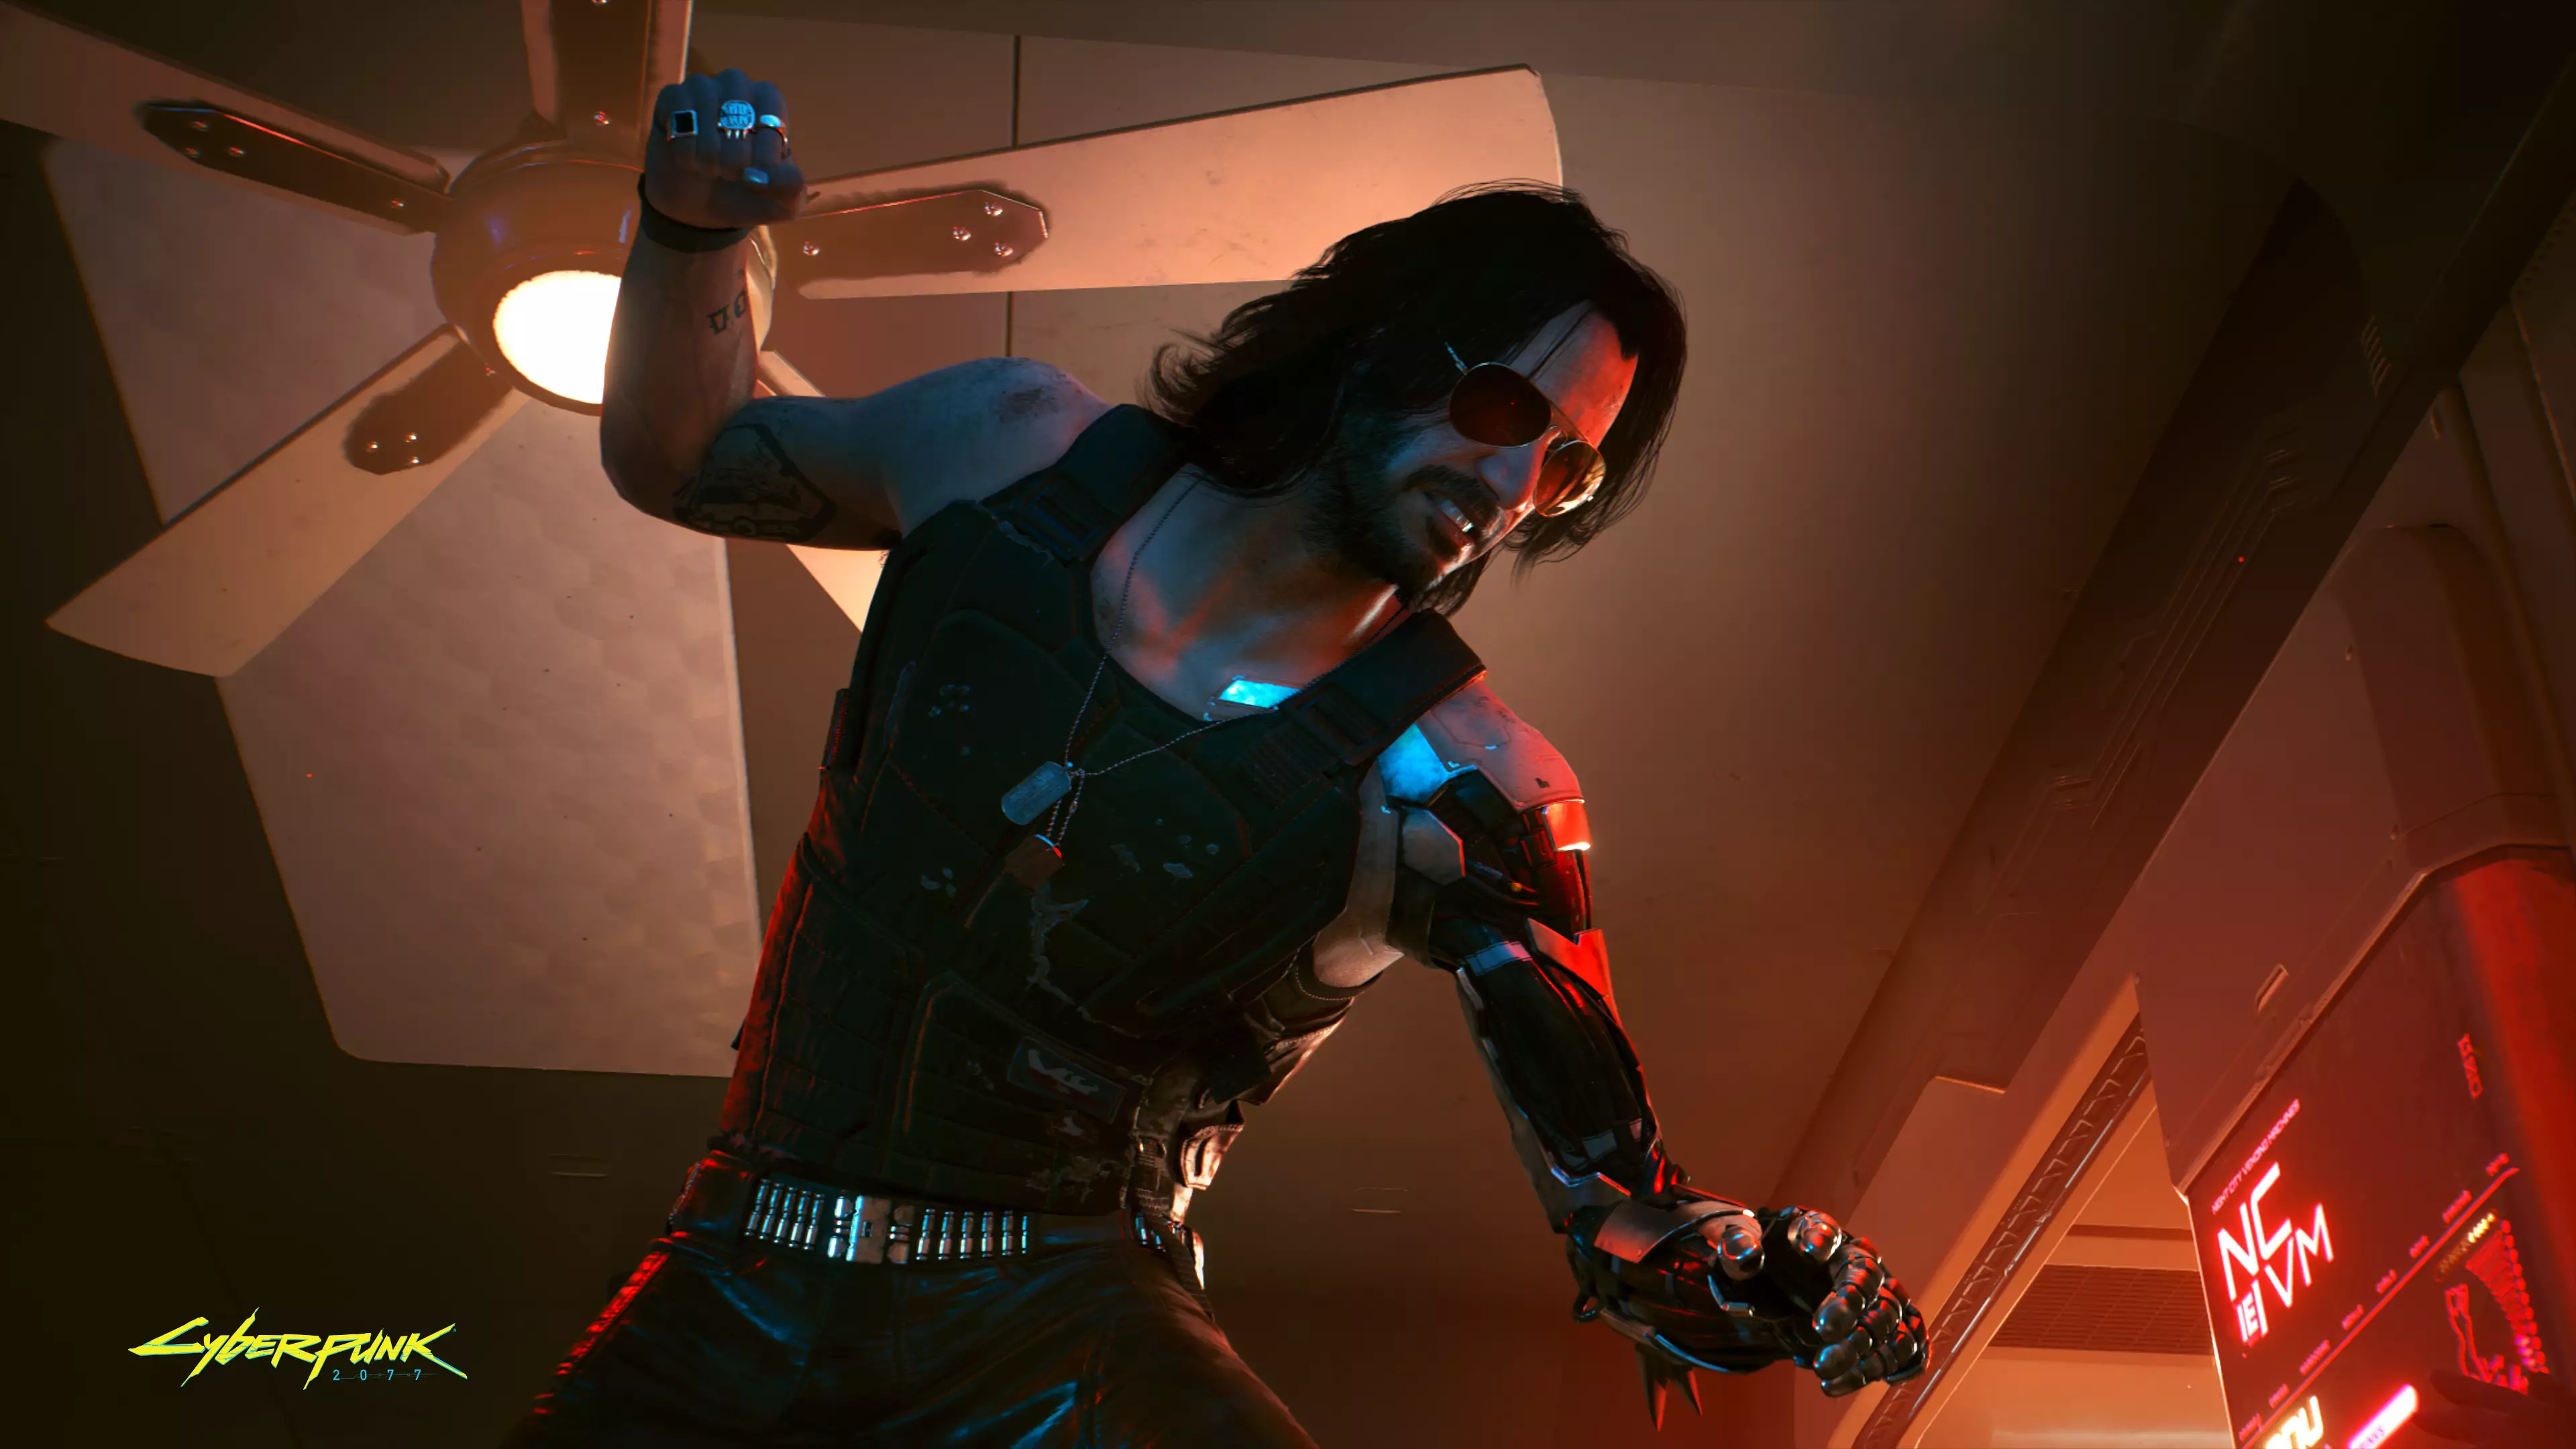 Keanu Reeves gets into the role of Johnny Silverhand (